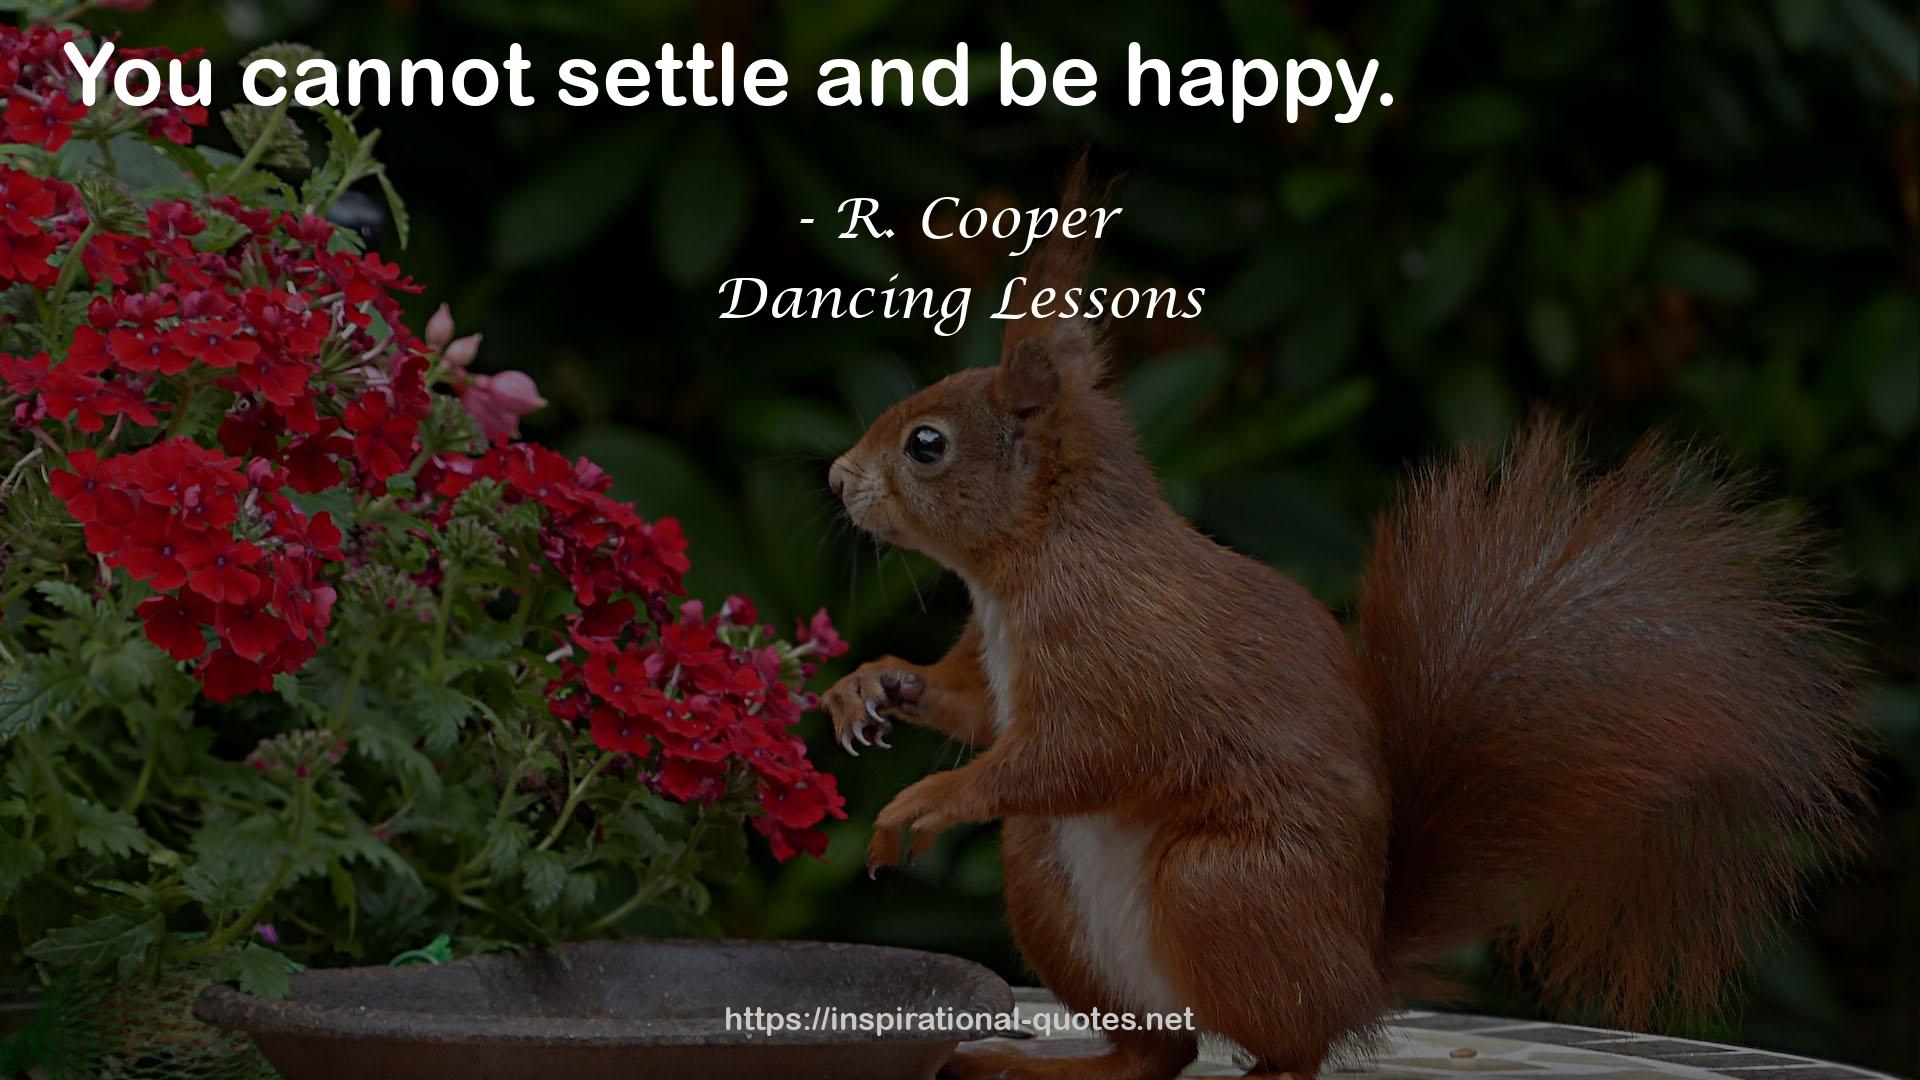 Dancing Lessons QUOTES